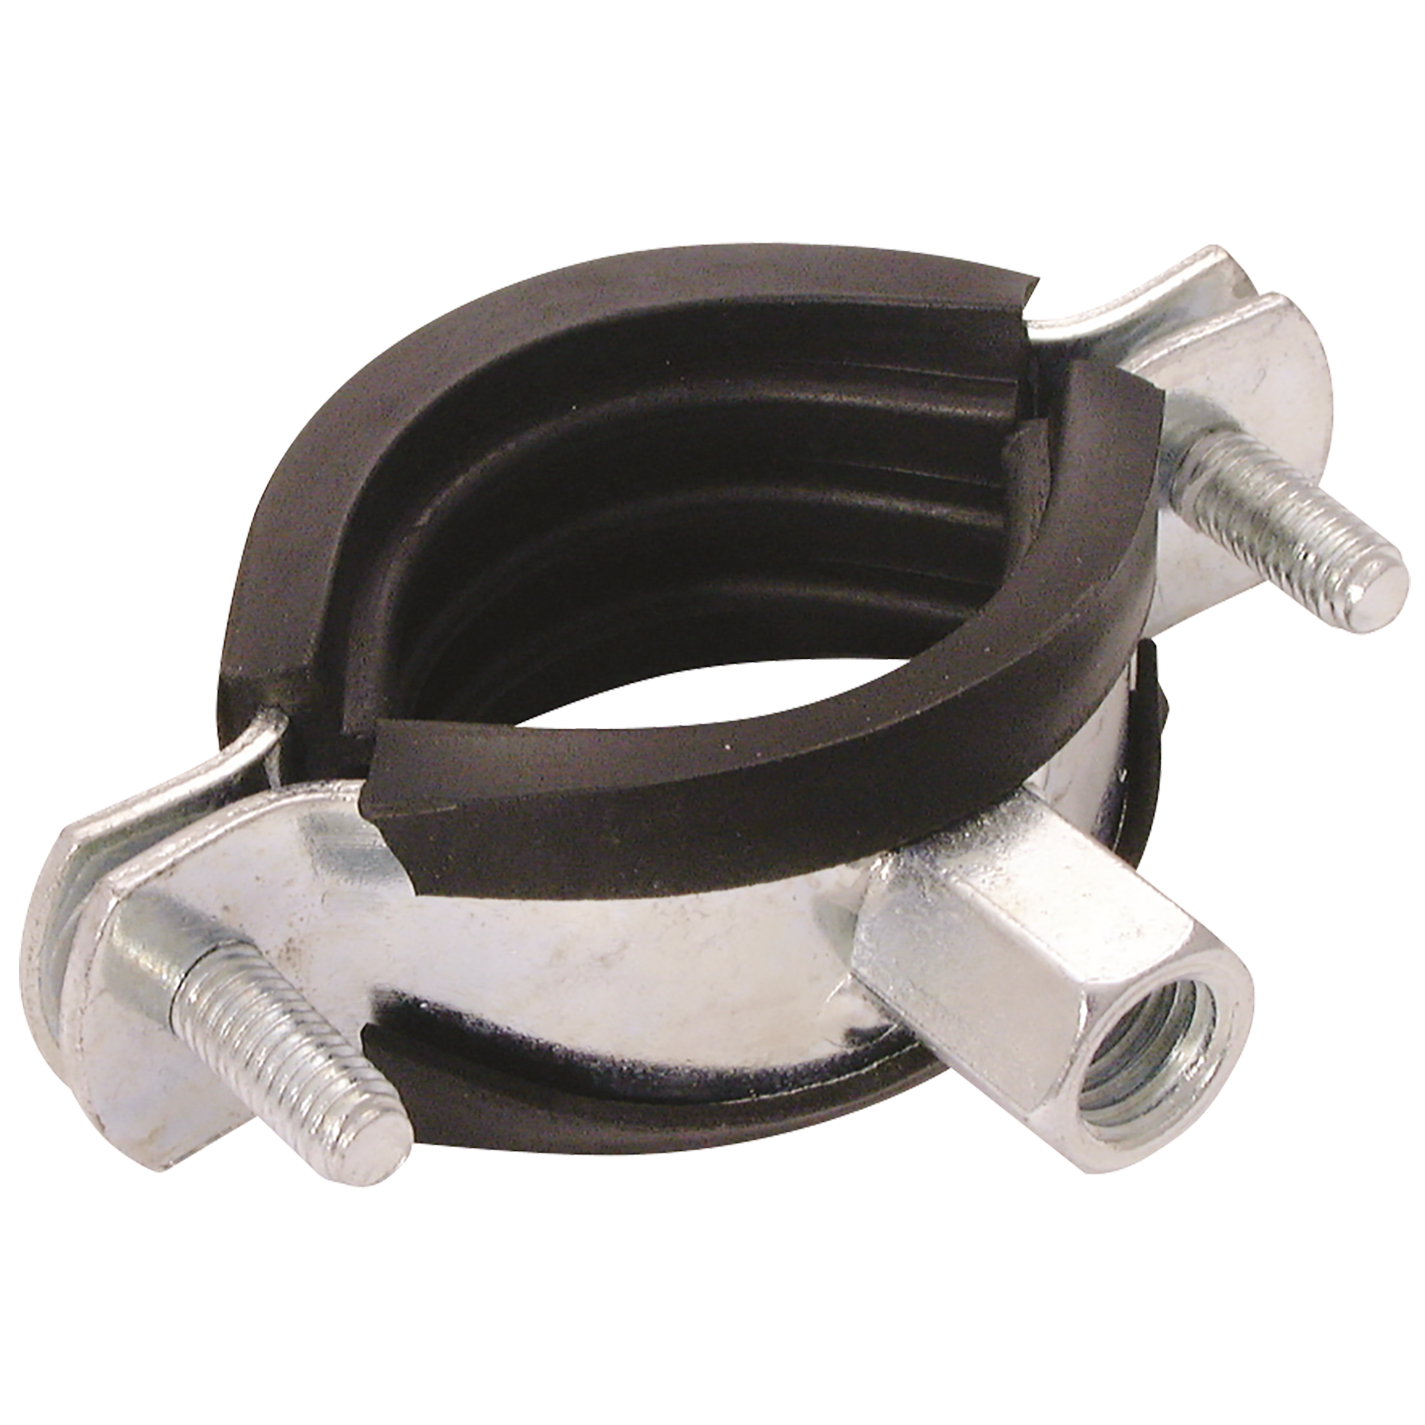 12-15 MM EPDM INSULATED RUBBER LINED CLIPS M8/M10